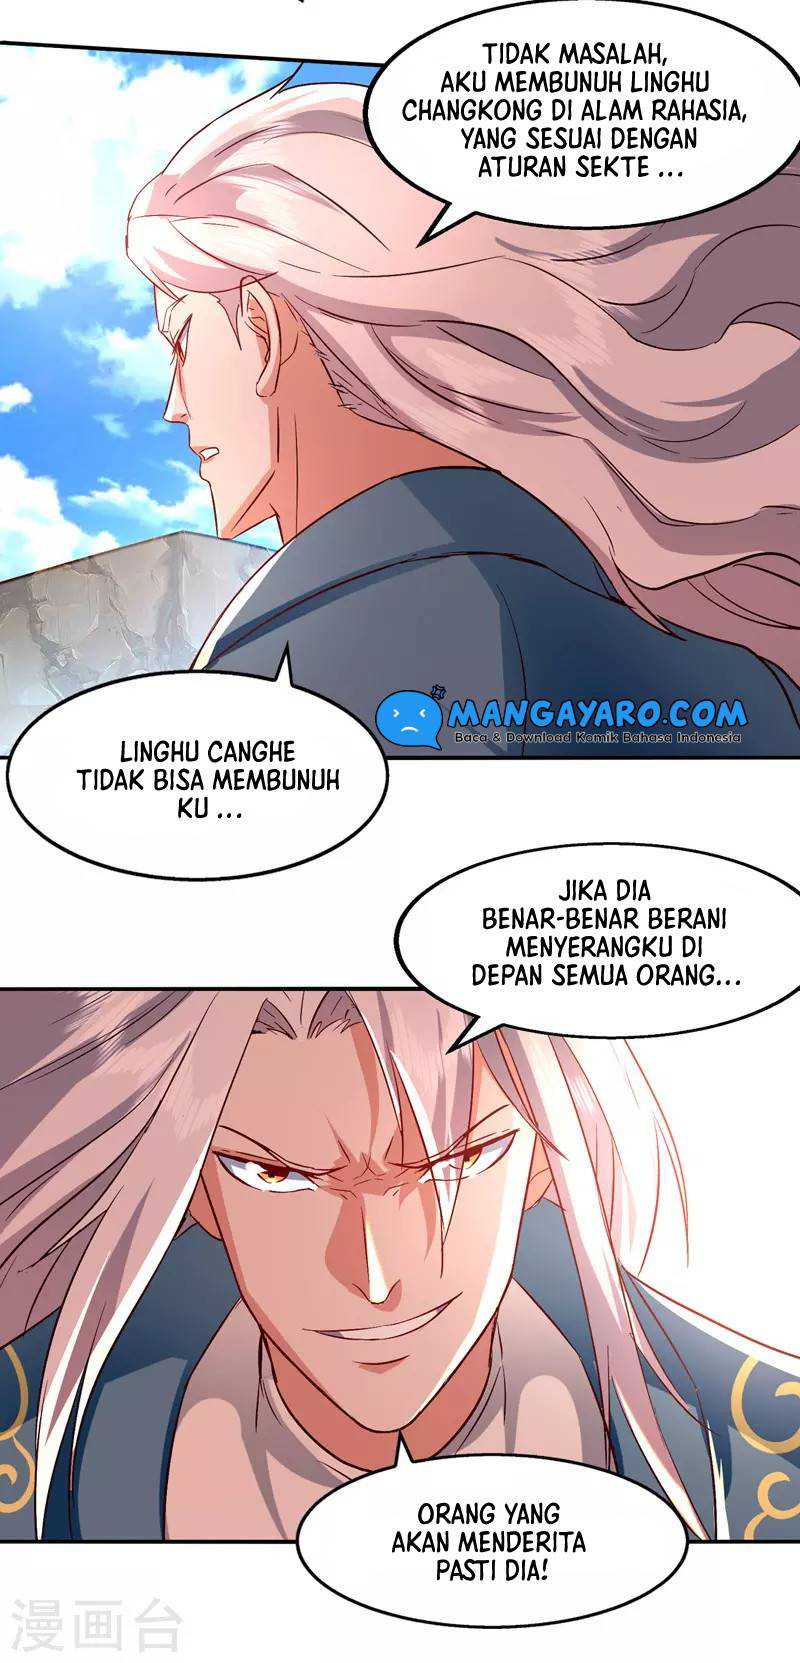 Against The Heaven Supreme (Heaven Guards) Chapter 83 - 159